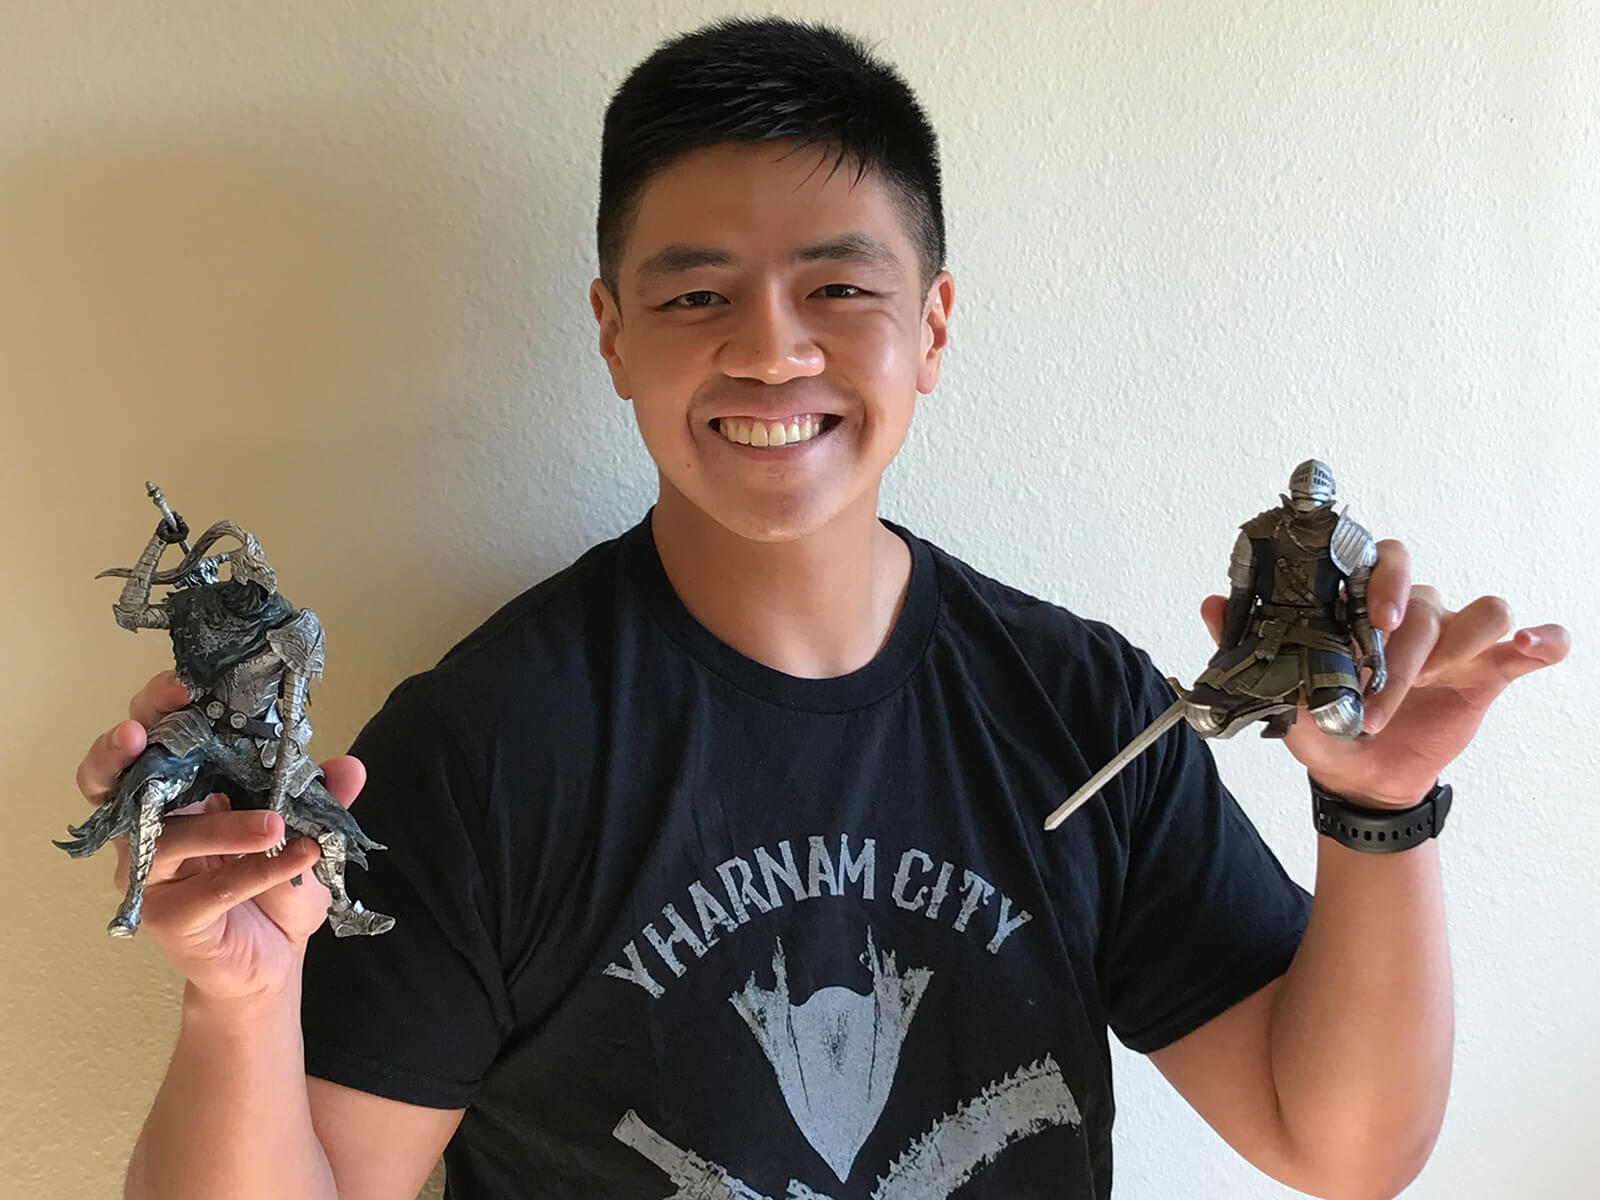 Cal Santiago smiles wearing a Bloodborne-themed shirt, holding two Dark Souls figurines.